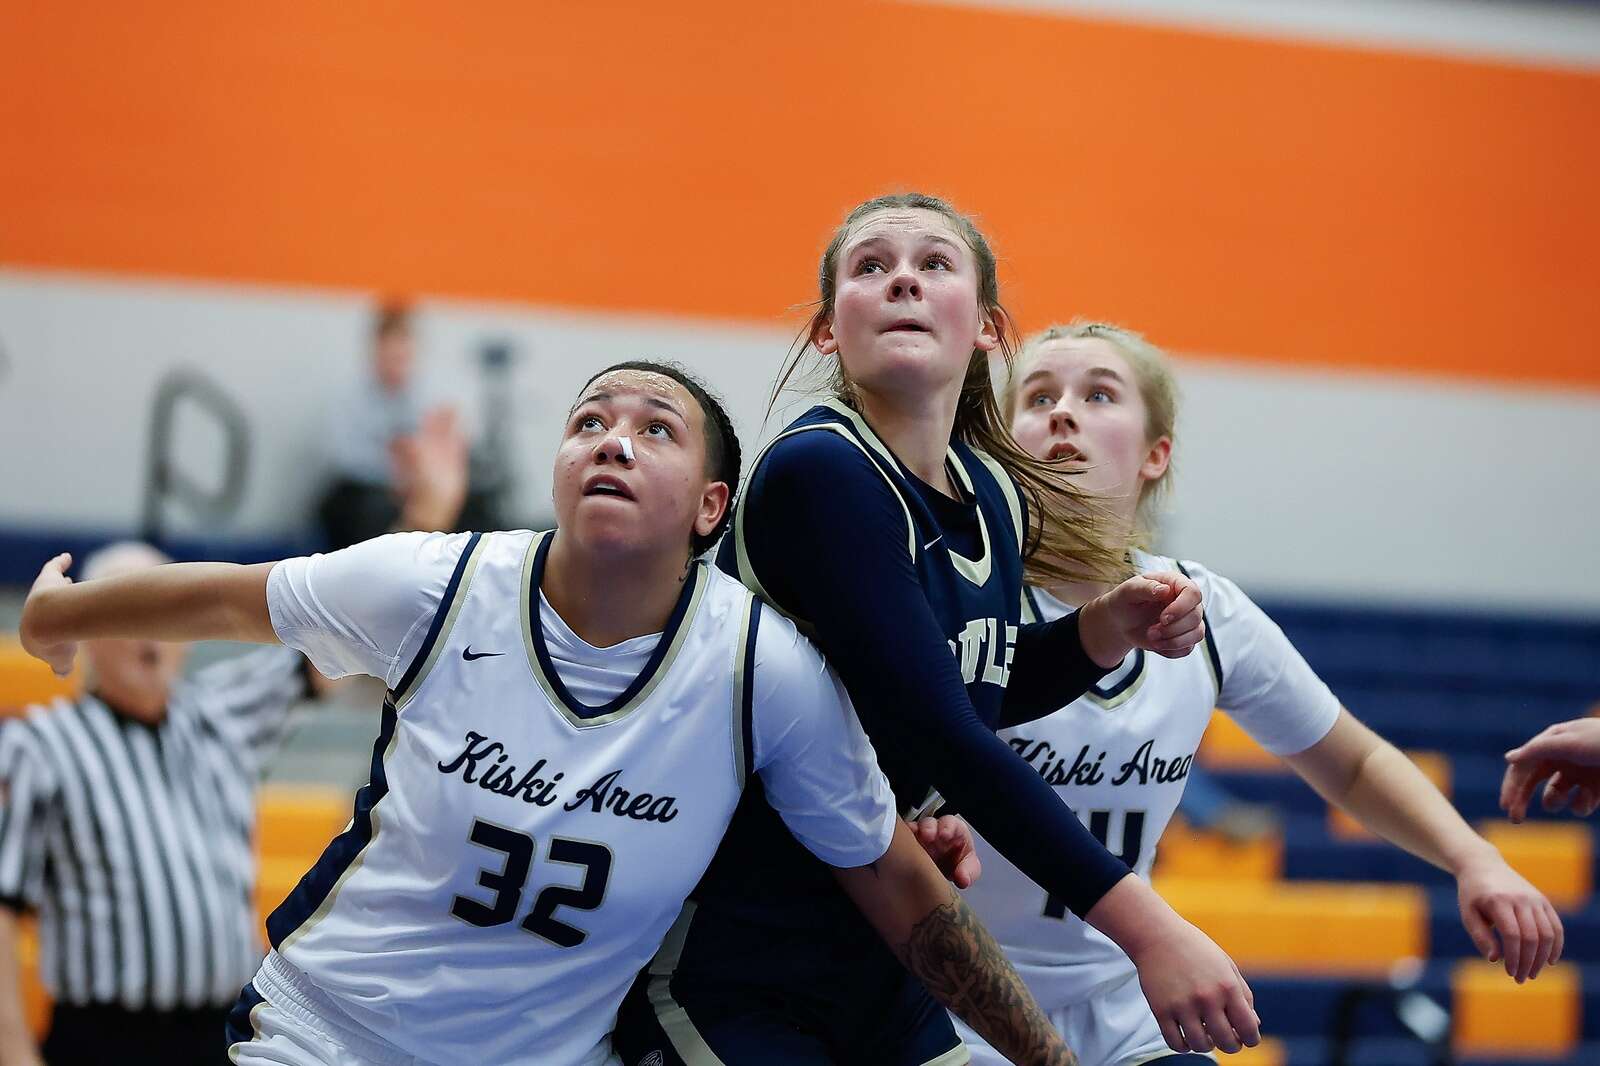 Avery Maier is boxed out by Kiski Area's Rikiya Garcia-Broaden during a free-throw attempt